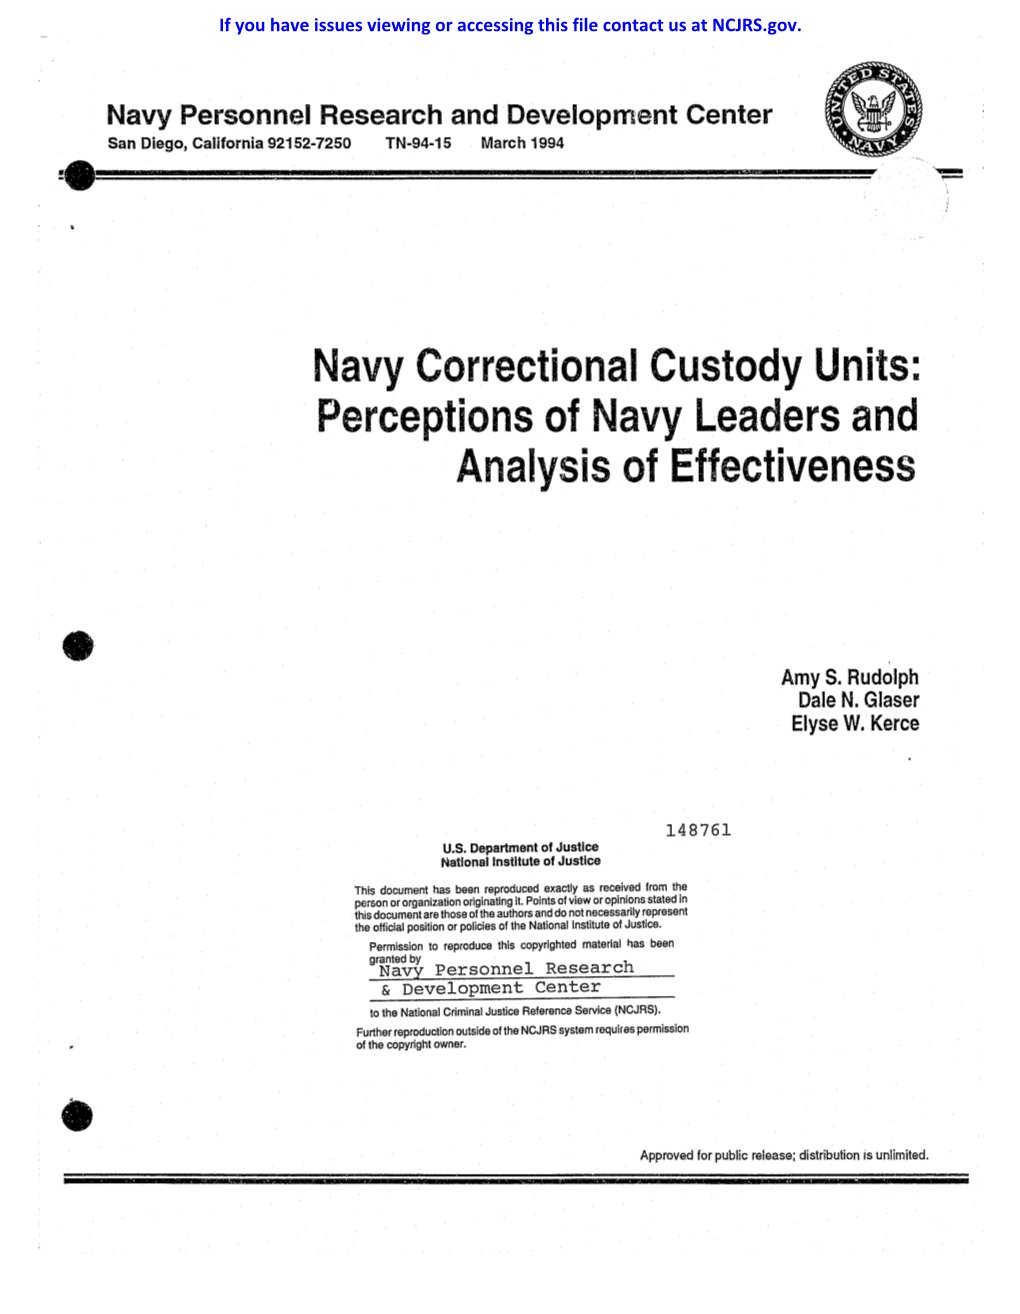 Navy Correctional Custody Units: Perceptions of Navy Leaders and Analysis of Effectiveness